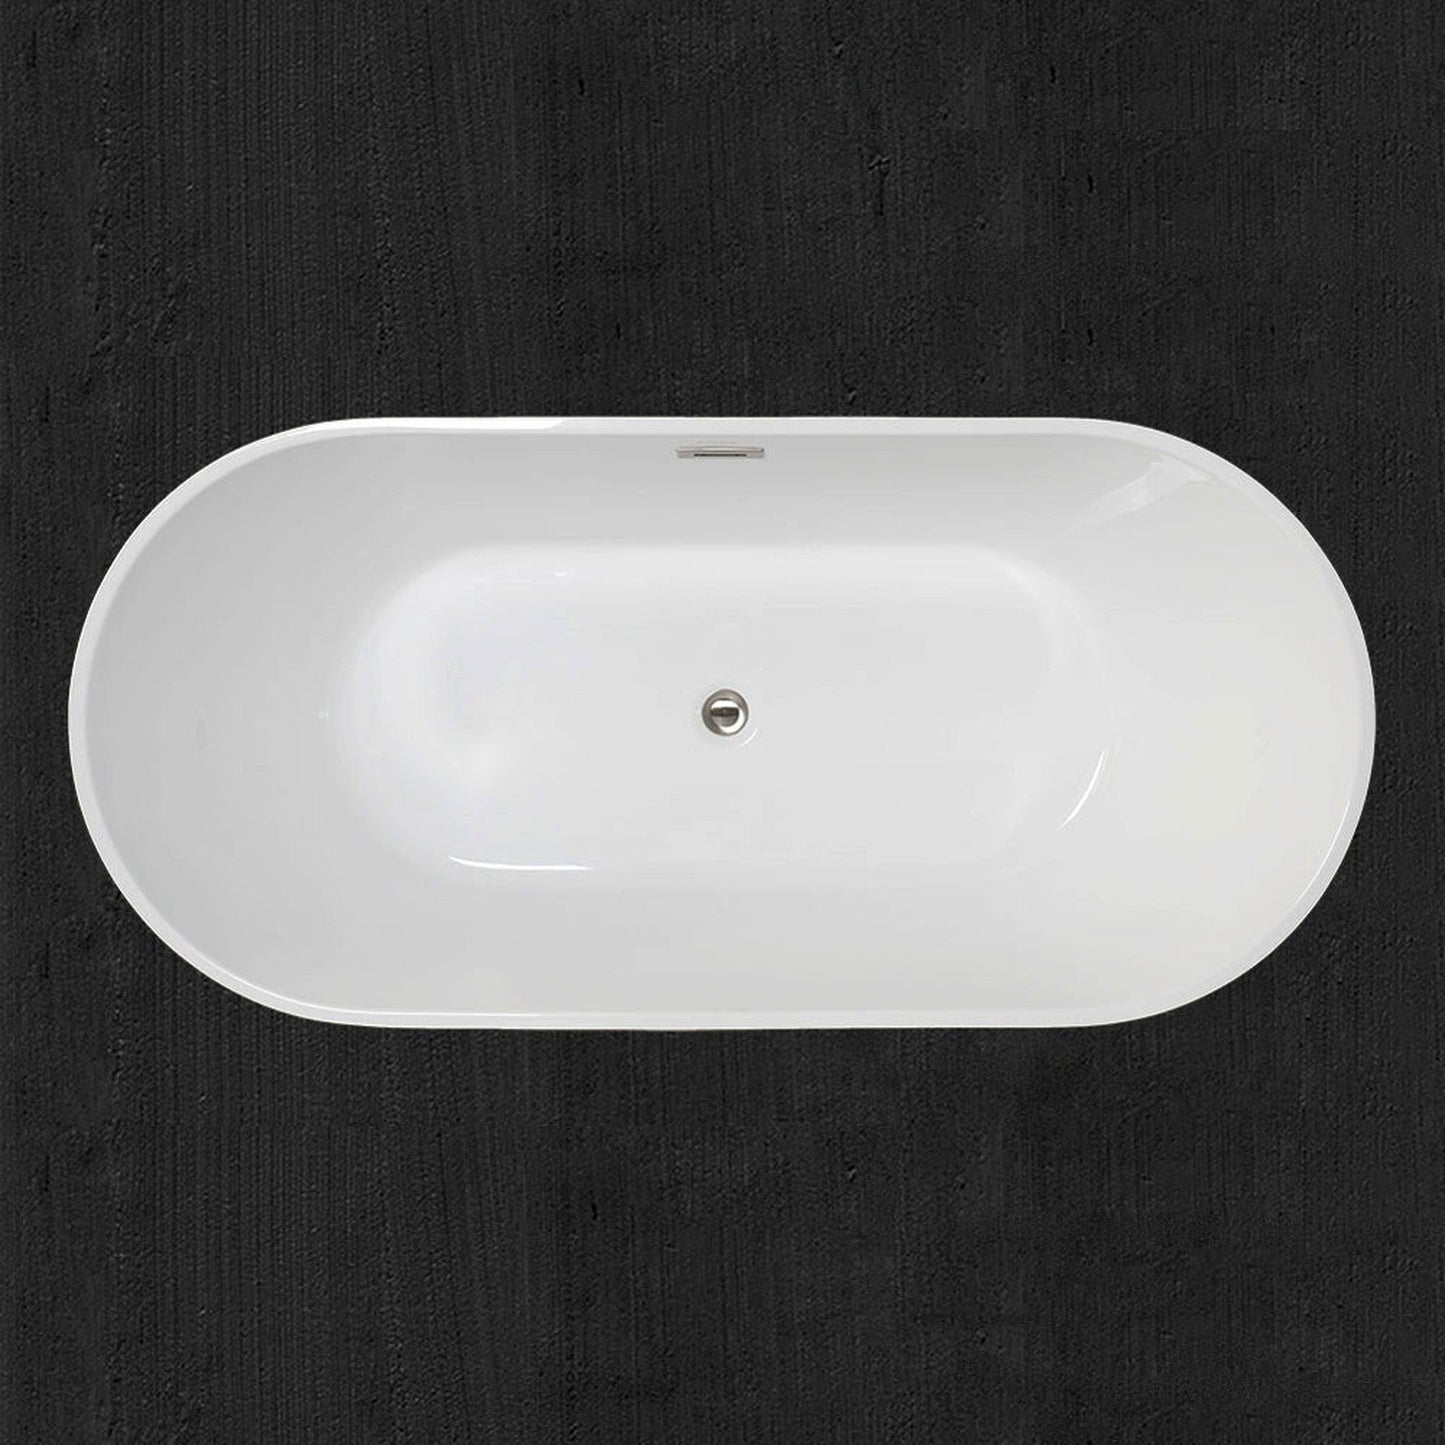 WoodBridge 59" Black Acrylic Freestanding Contemporary Soaking Bathtub With Brushed Nickel Drain, Overflow, F0001BNVT Tub Filler and Caddy Tray